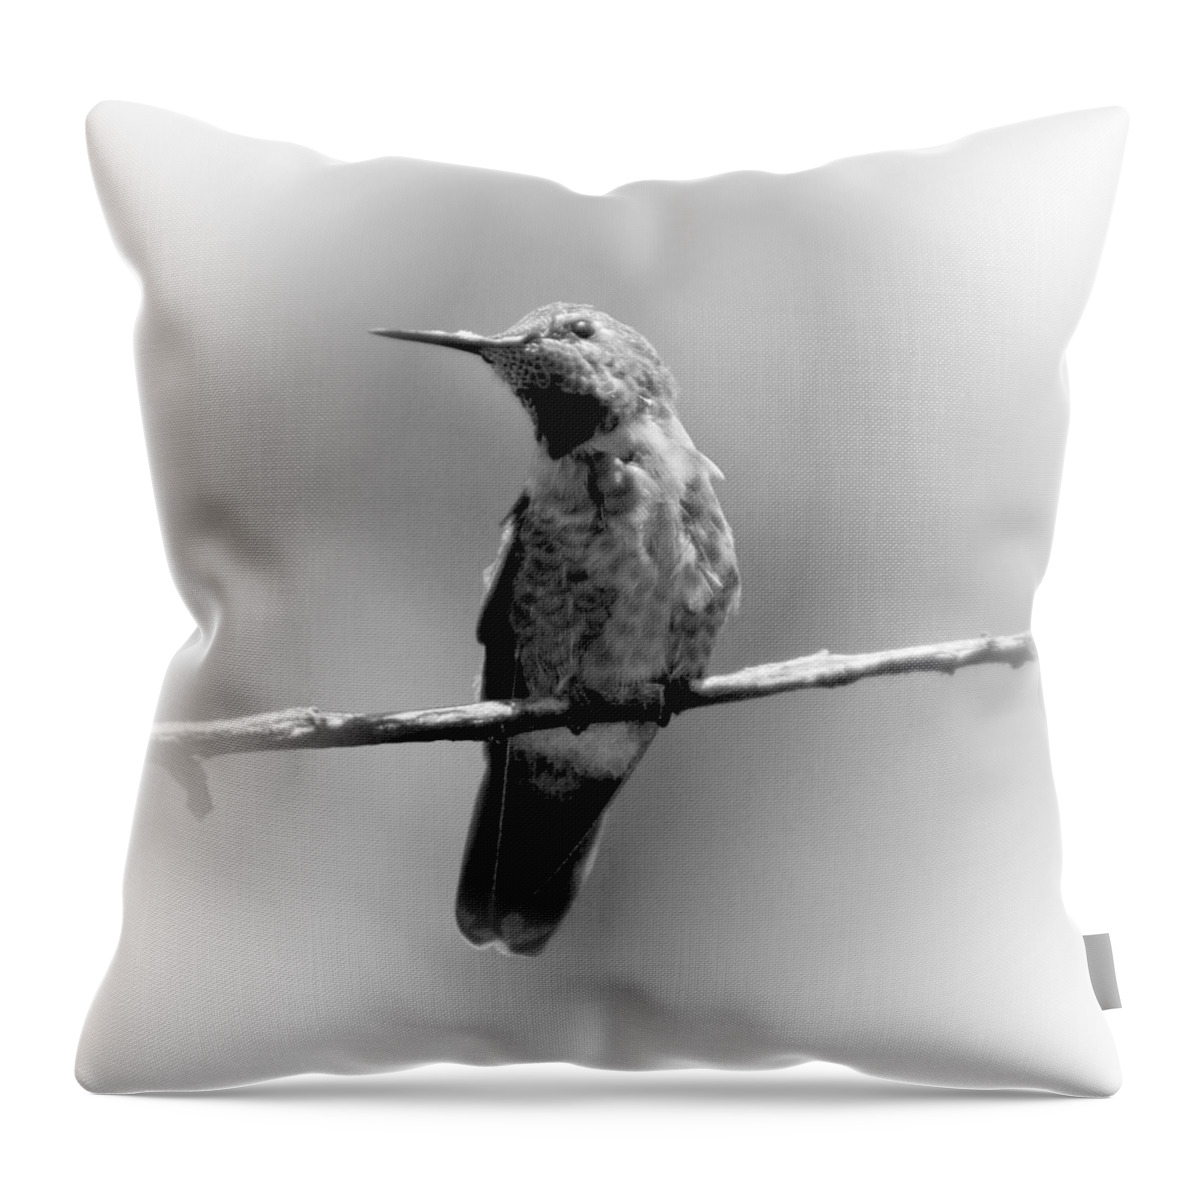 Hummingbird Throw Pillow featuring the photograph Hummingbird in Black and White by Her Arts Desire